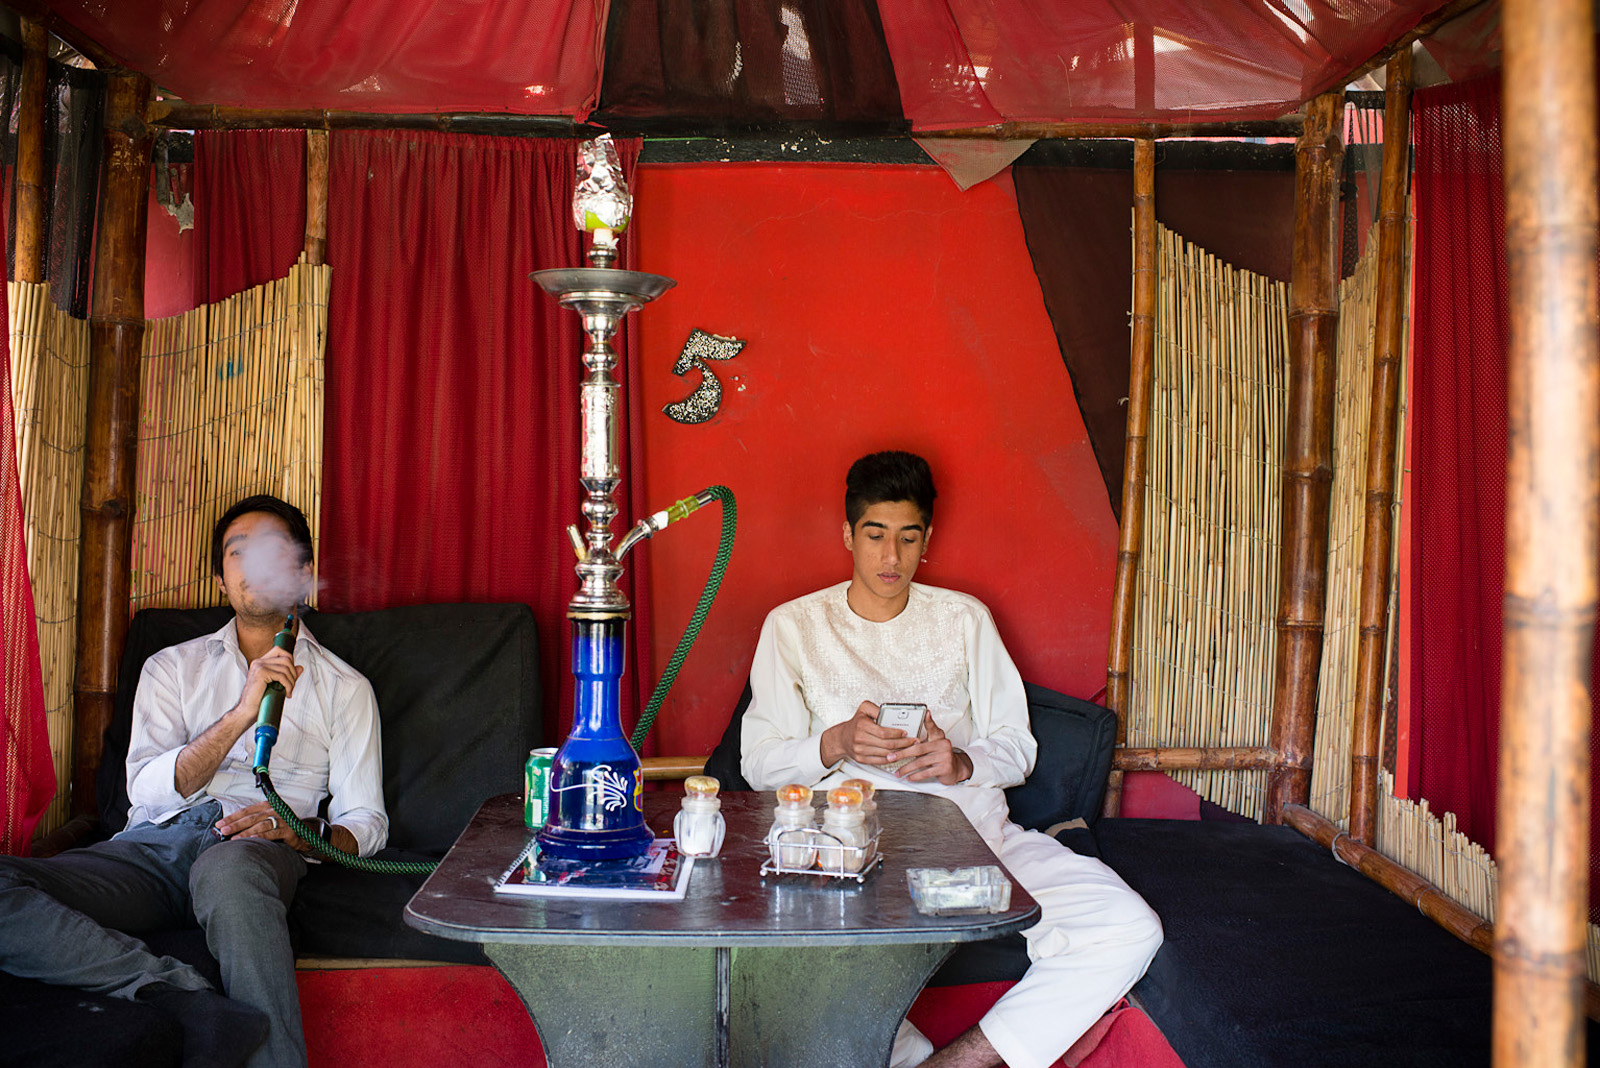 KABUL, AFGHANISTAN | 2014-08-10 | Young Afghan men, all in their early 20s, socialize and smoke hooka at Cafe Che, in Western Kabul. Cafe Che is one of the fewer cafes that have become very popular among young people in mixed groups as a meeting place.